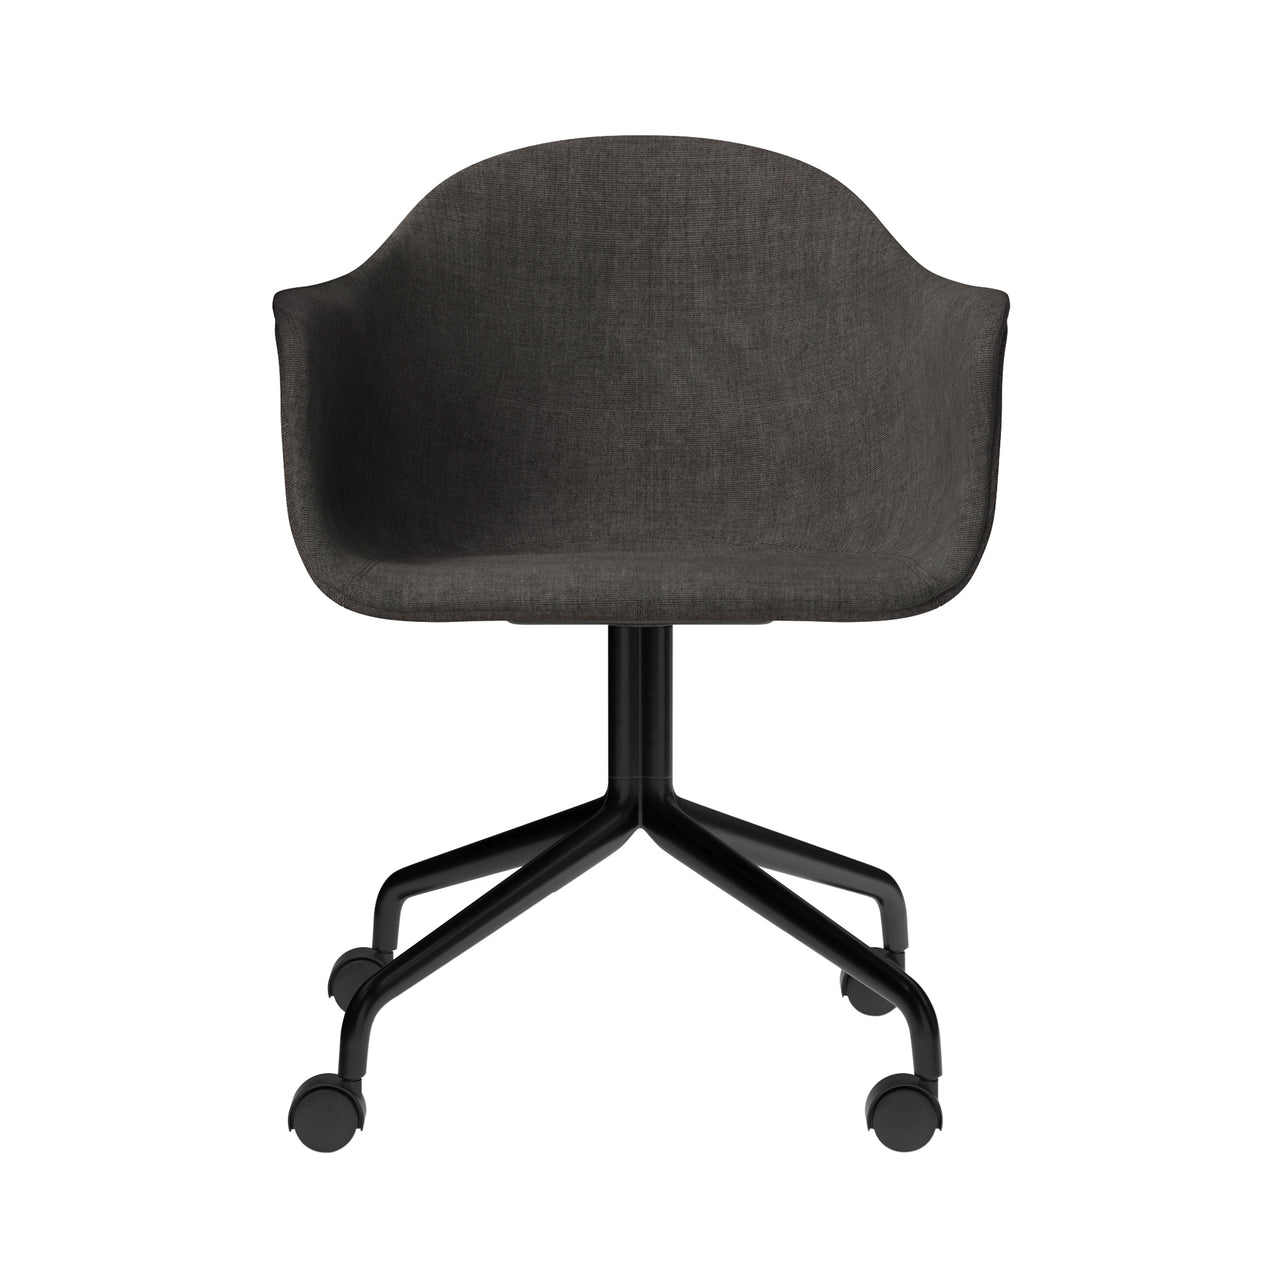 Harbour Dining Chair Star Base with Casters: Upholstered + Black Steel